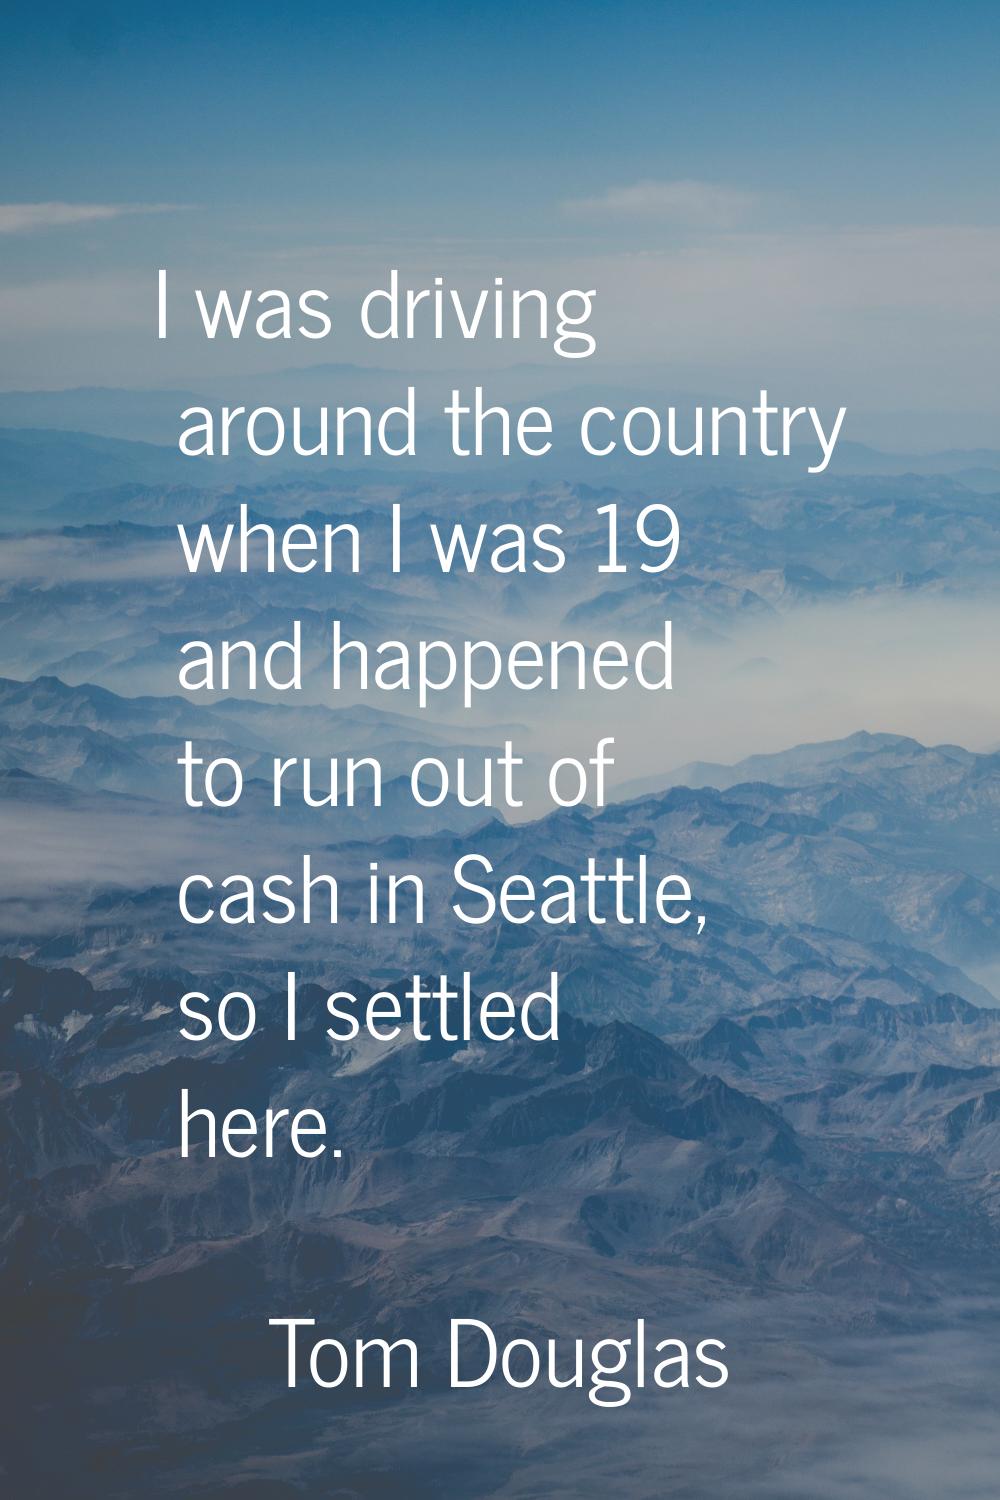 I was driving around the country when I was 19 and happened to run out of cash in Seattle, so I set